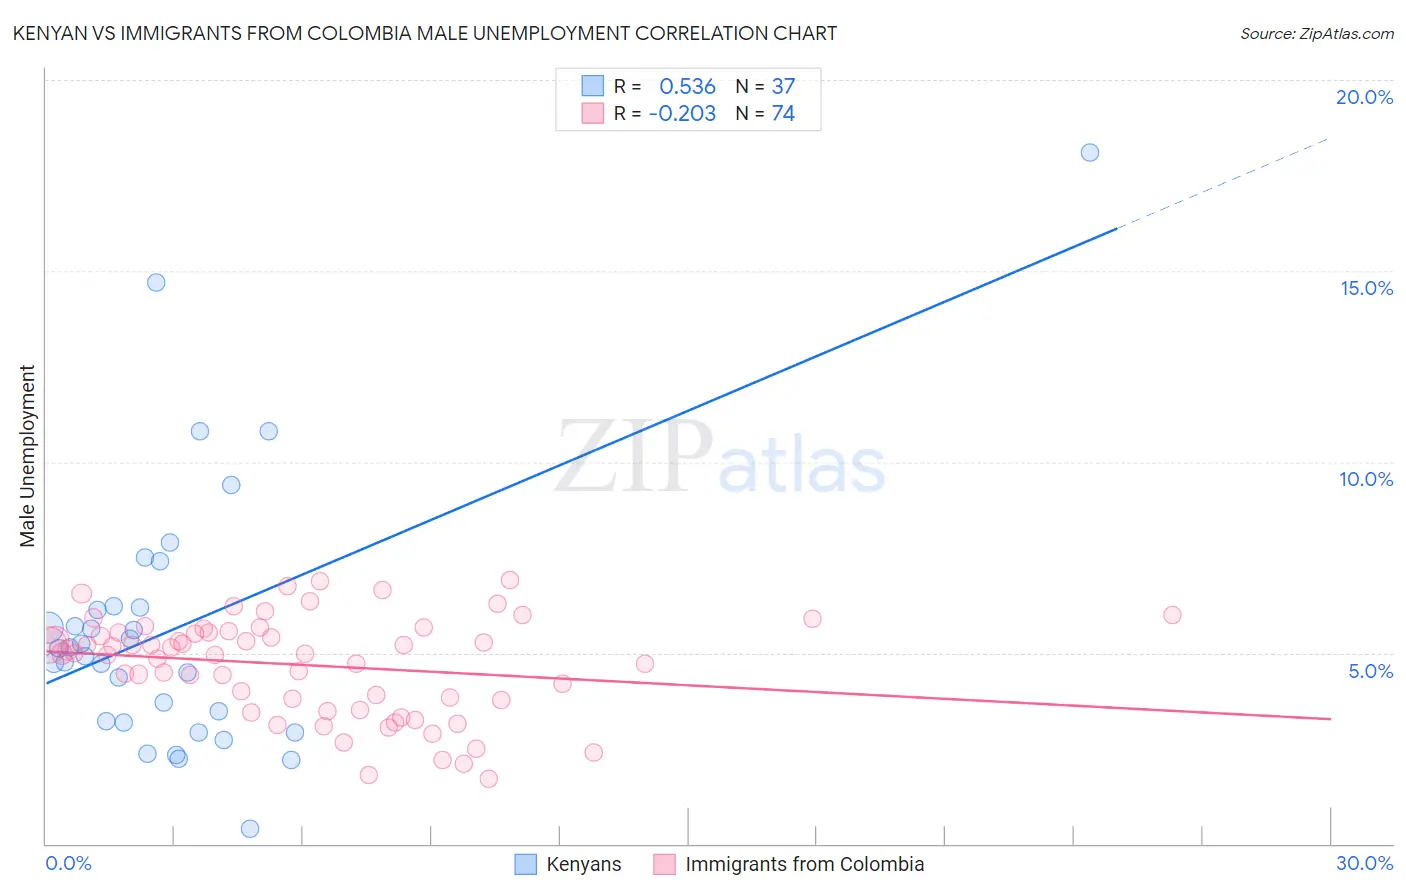 Kenyan vs Immigrants from Colombia Male Unemployment